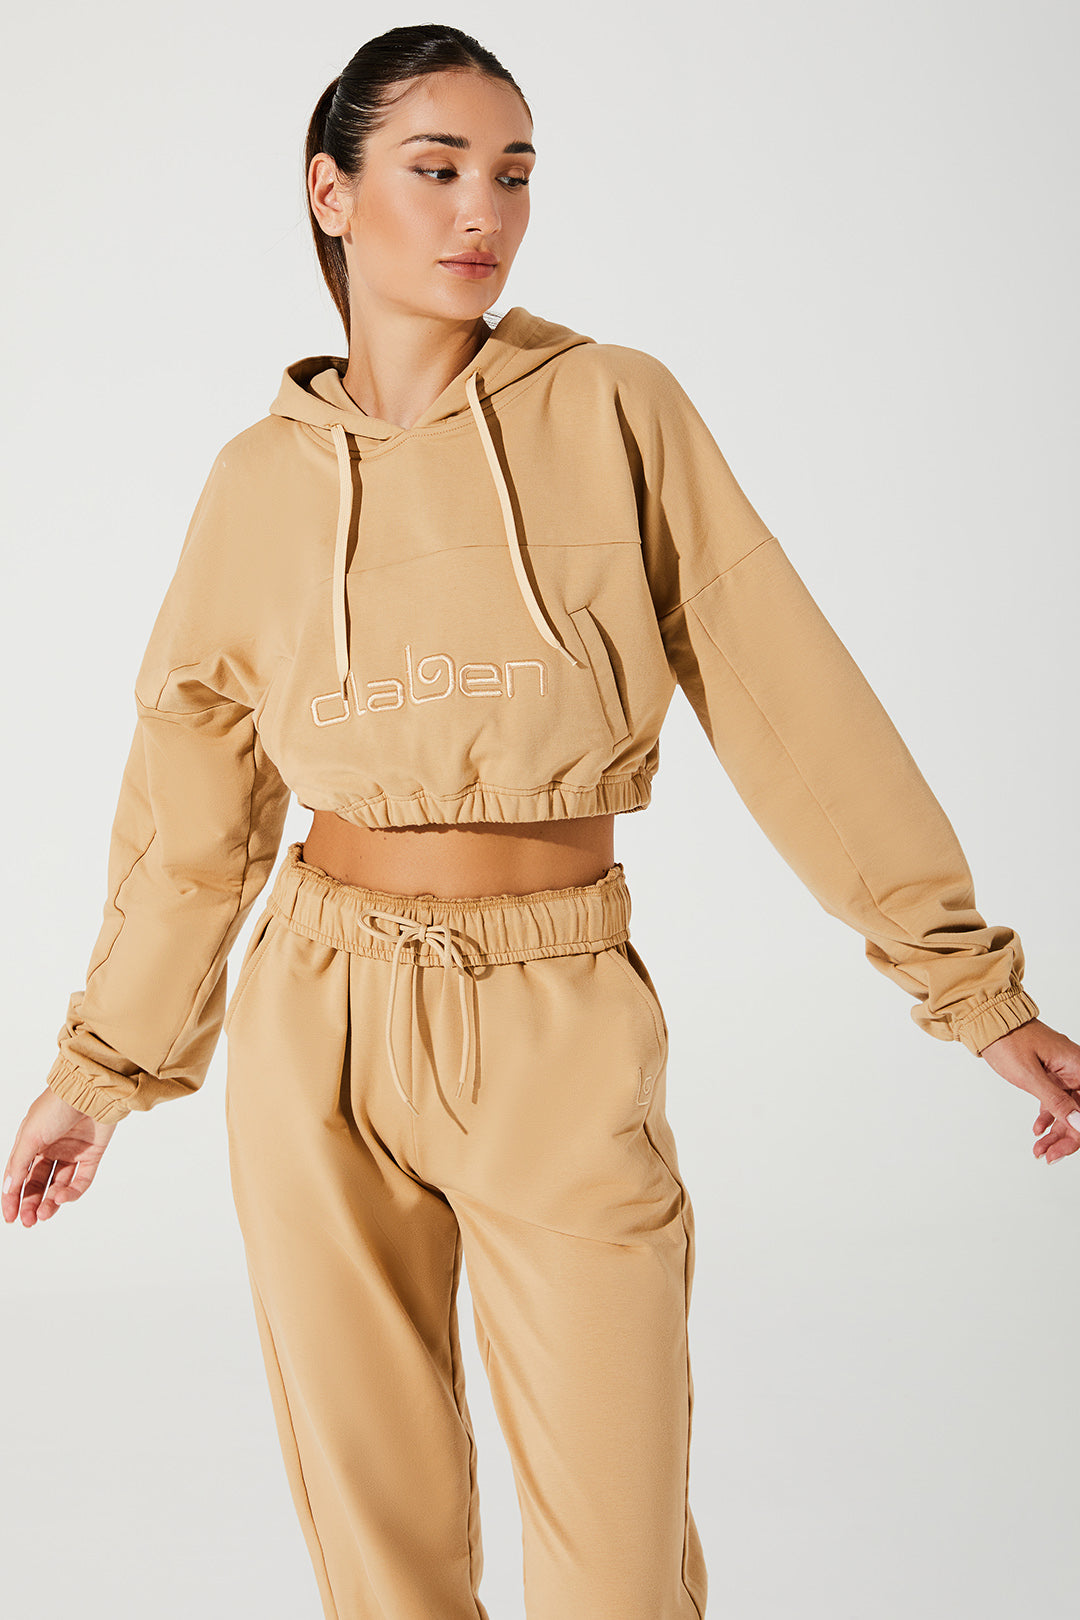 Stylish cappuccino beige women's hoodie with a cropped design - OW-0037-WHO-BG_1.jpg